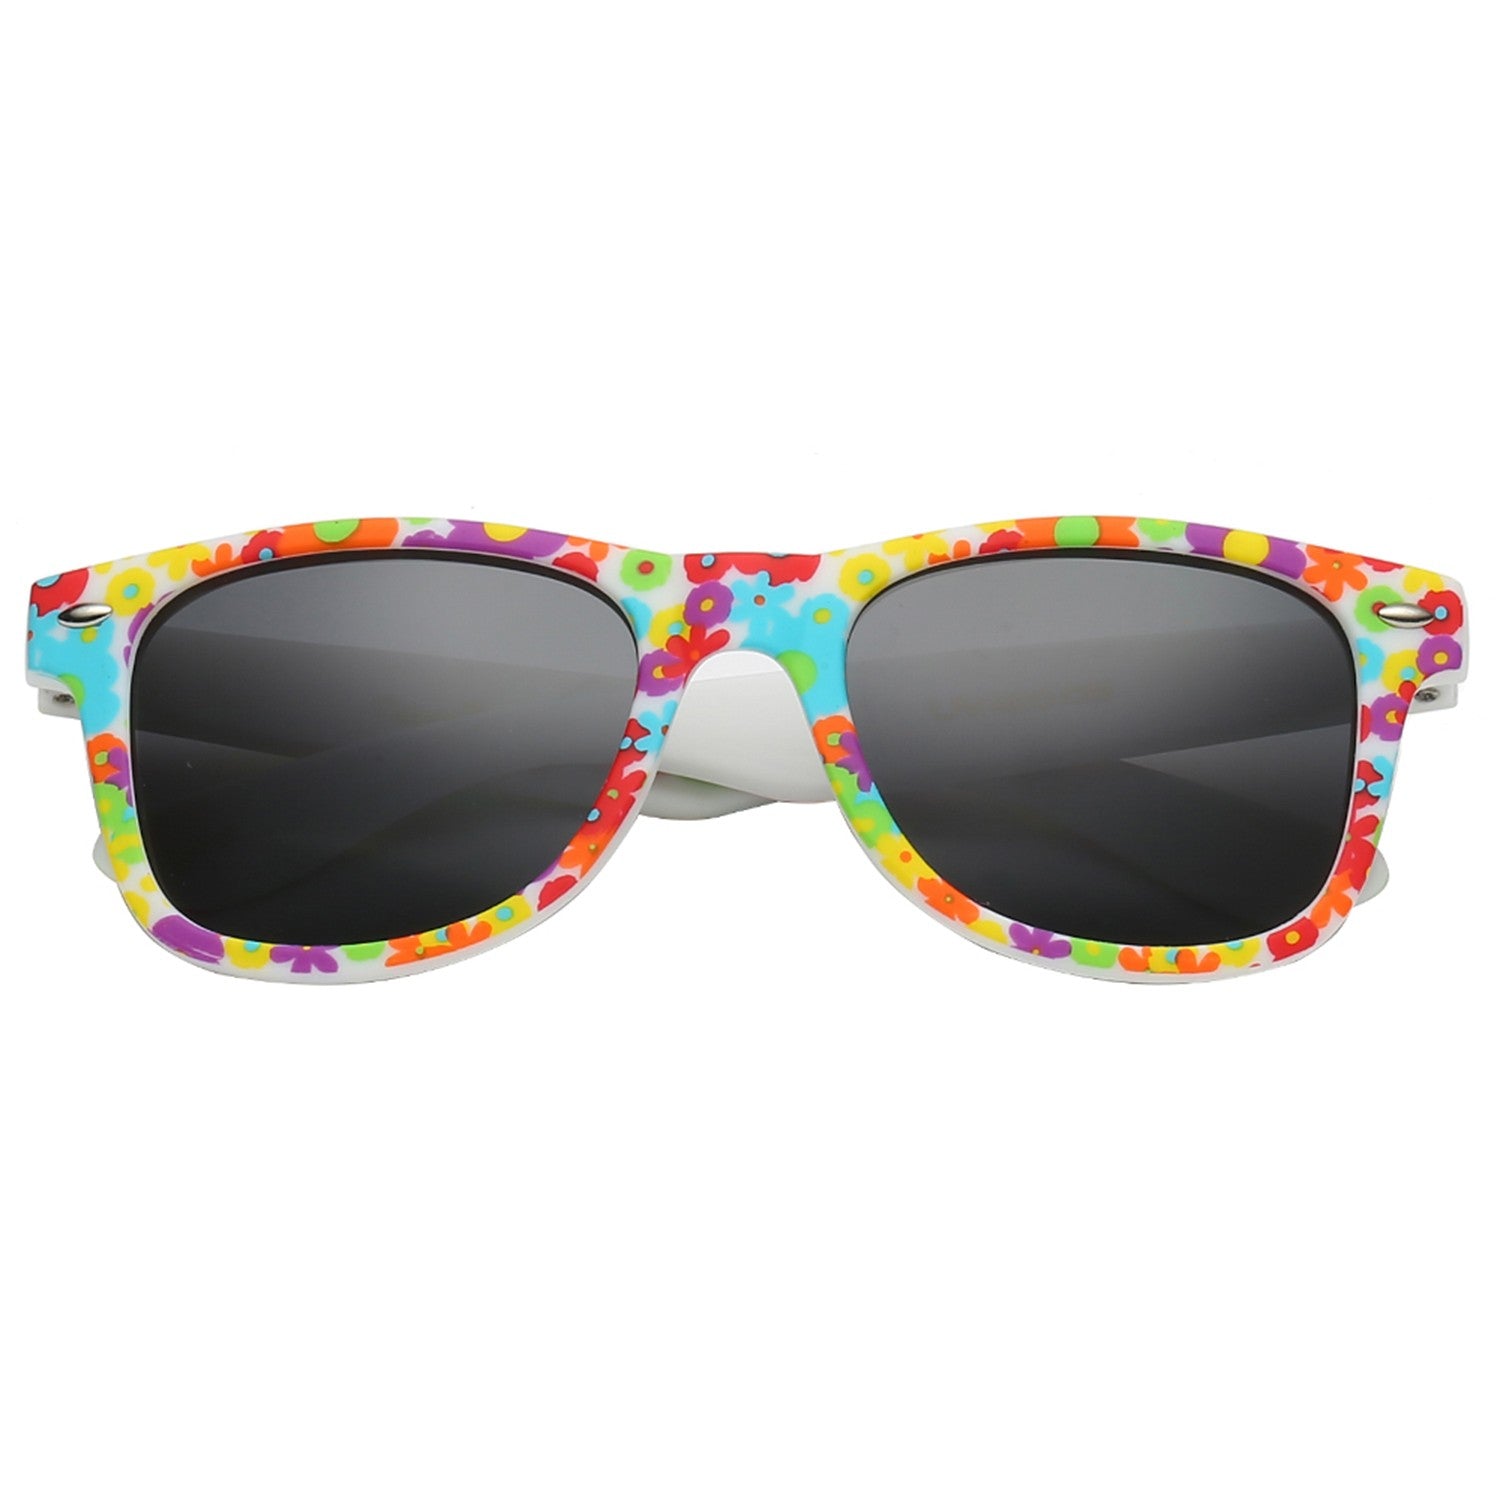 Polarspex Polarized 80's Retro Style Kids Sunglasses with Rubberized Hawaiian Floral Frames and Polarized Smoke Lenses for Boys and Girls